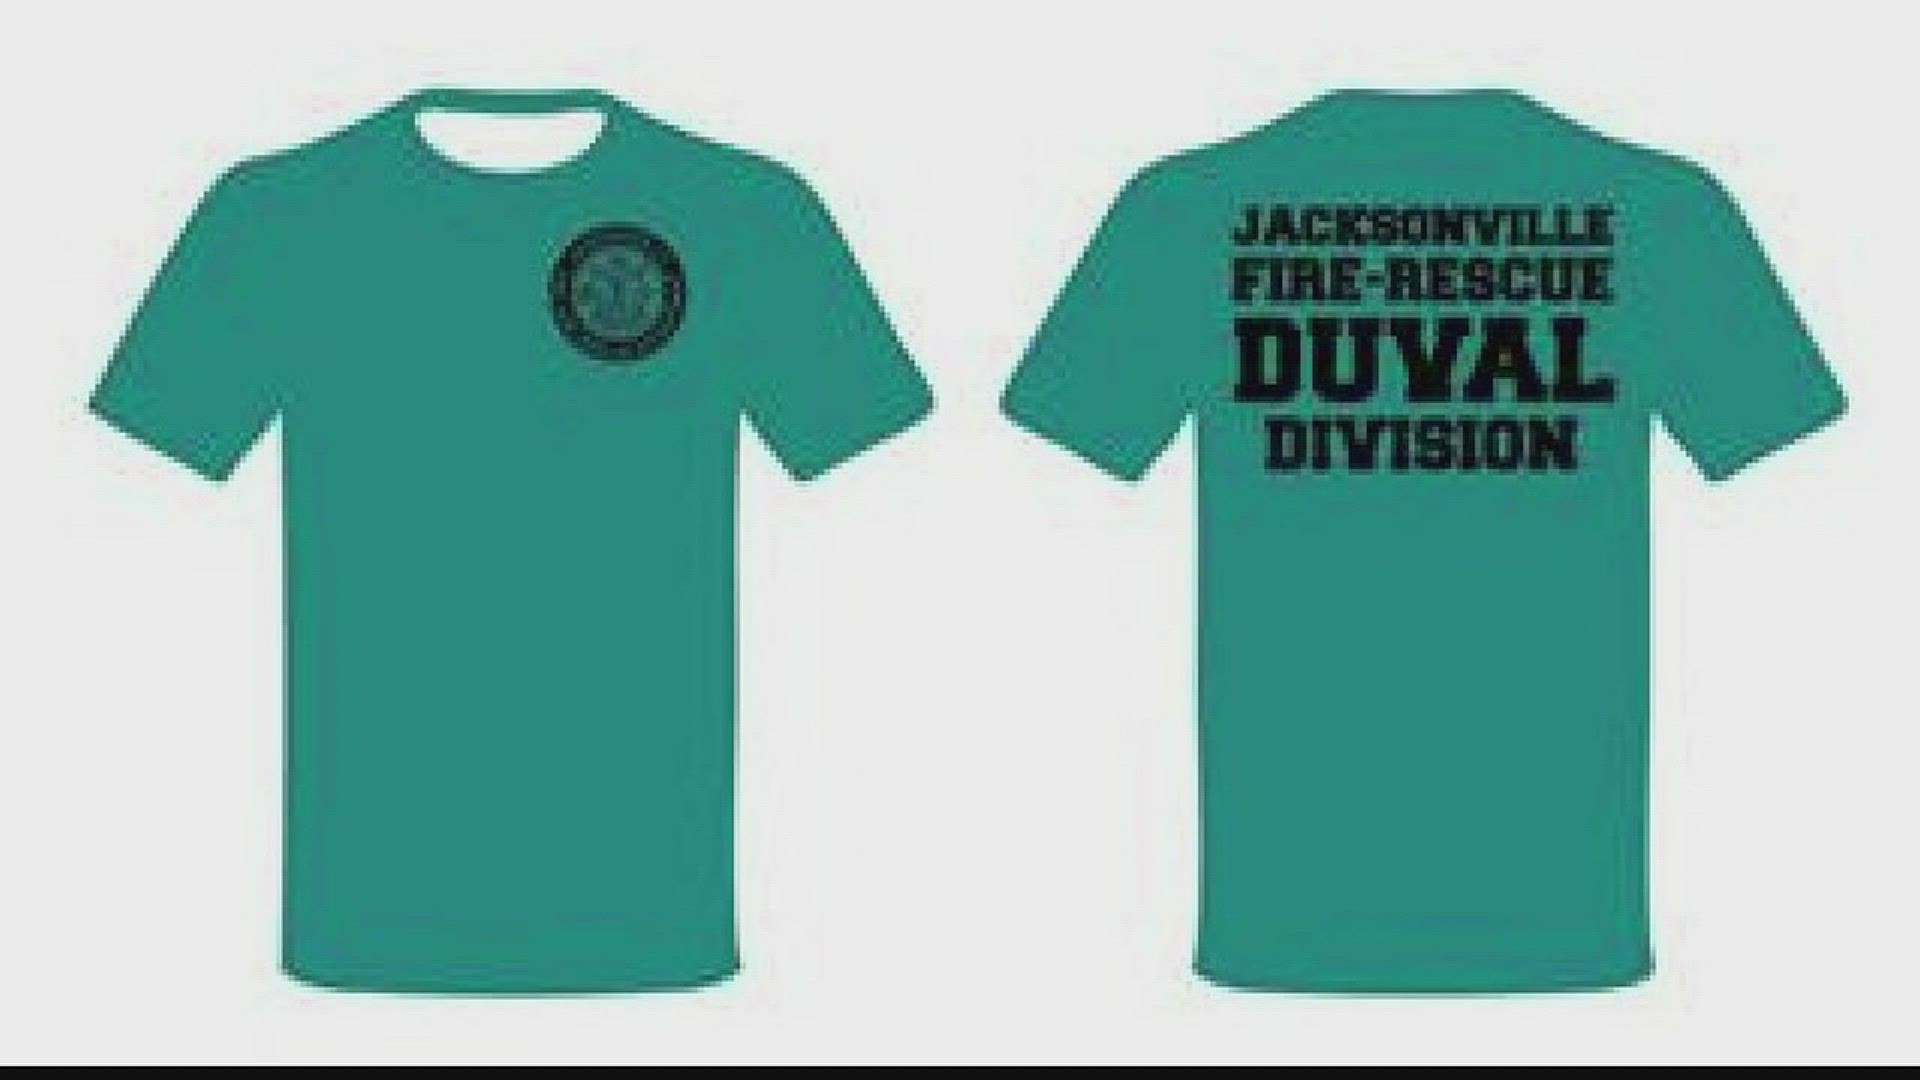 JFRD got approval to wear the teal uniforms to show support for the Jaguars.